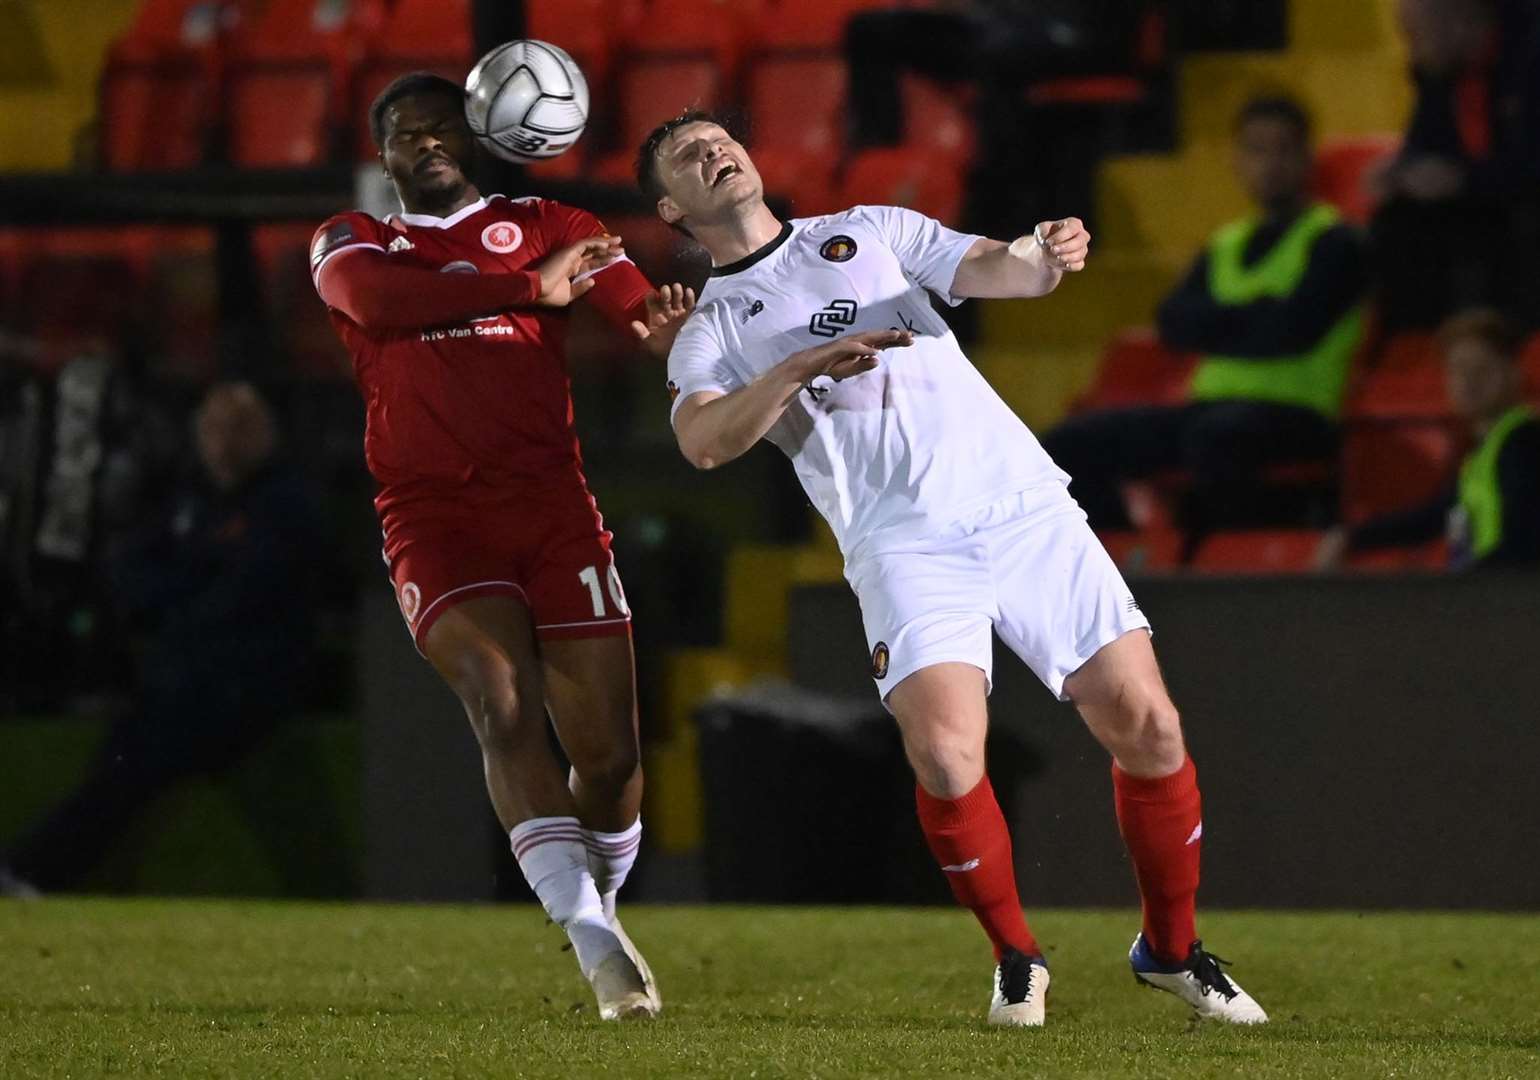 Welling striker Dipo Akinyemi gave the Ebbsfleet defence a torrid time on Tuesday night. Picture: Keith Gillard